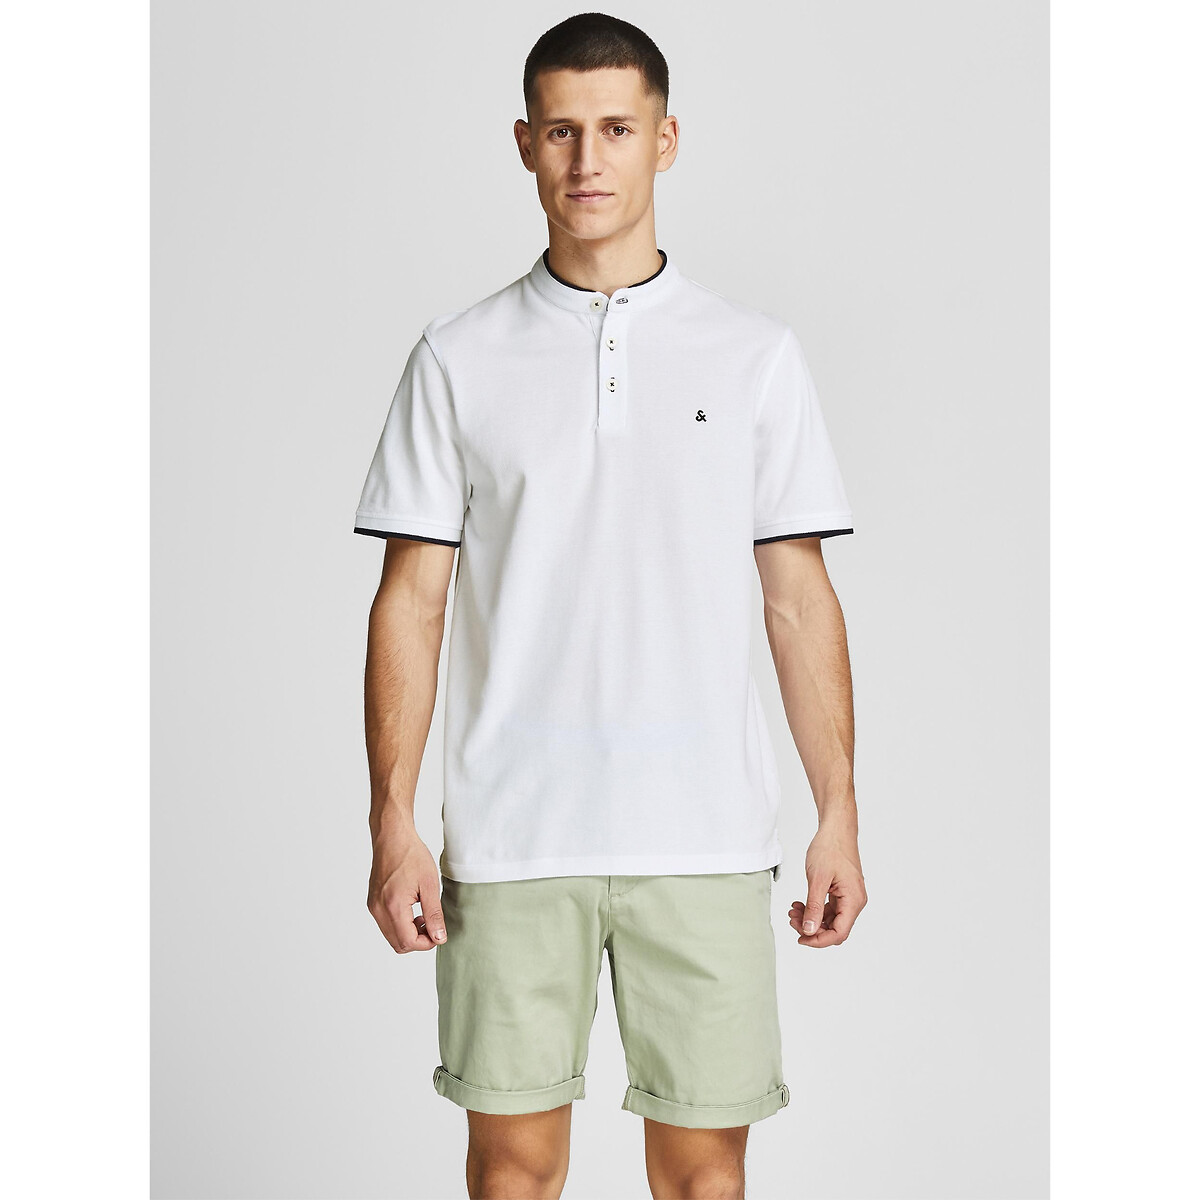 Image of Classic Cotton Pique Polo Shirt in Slim Fit